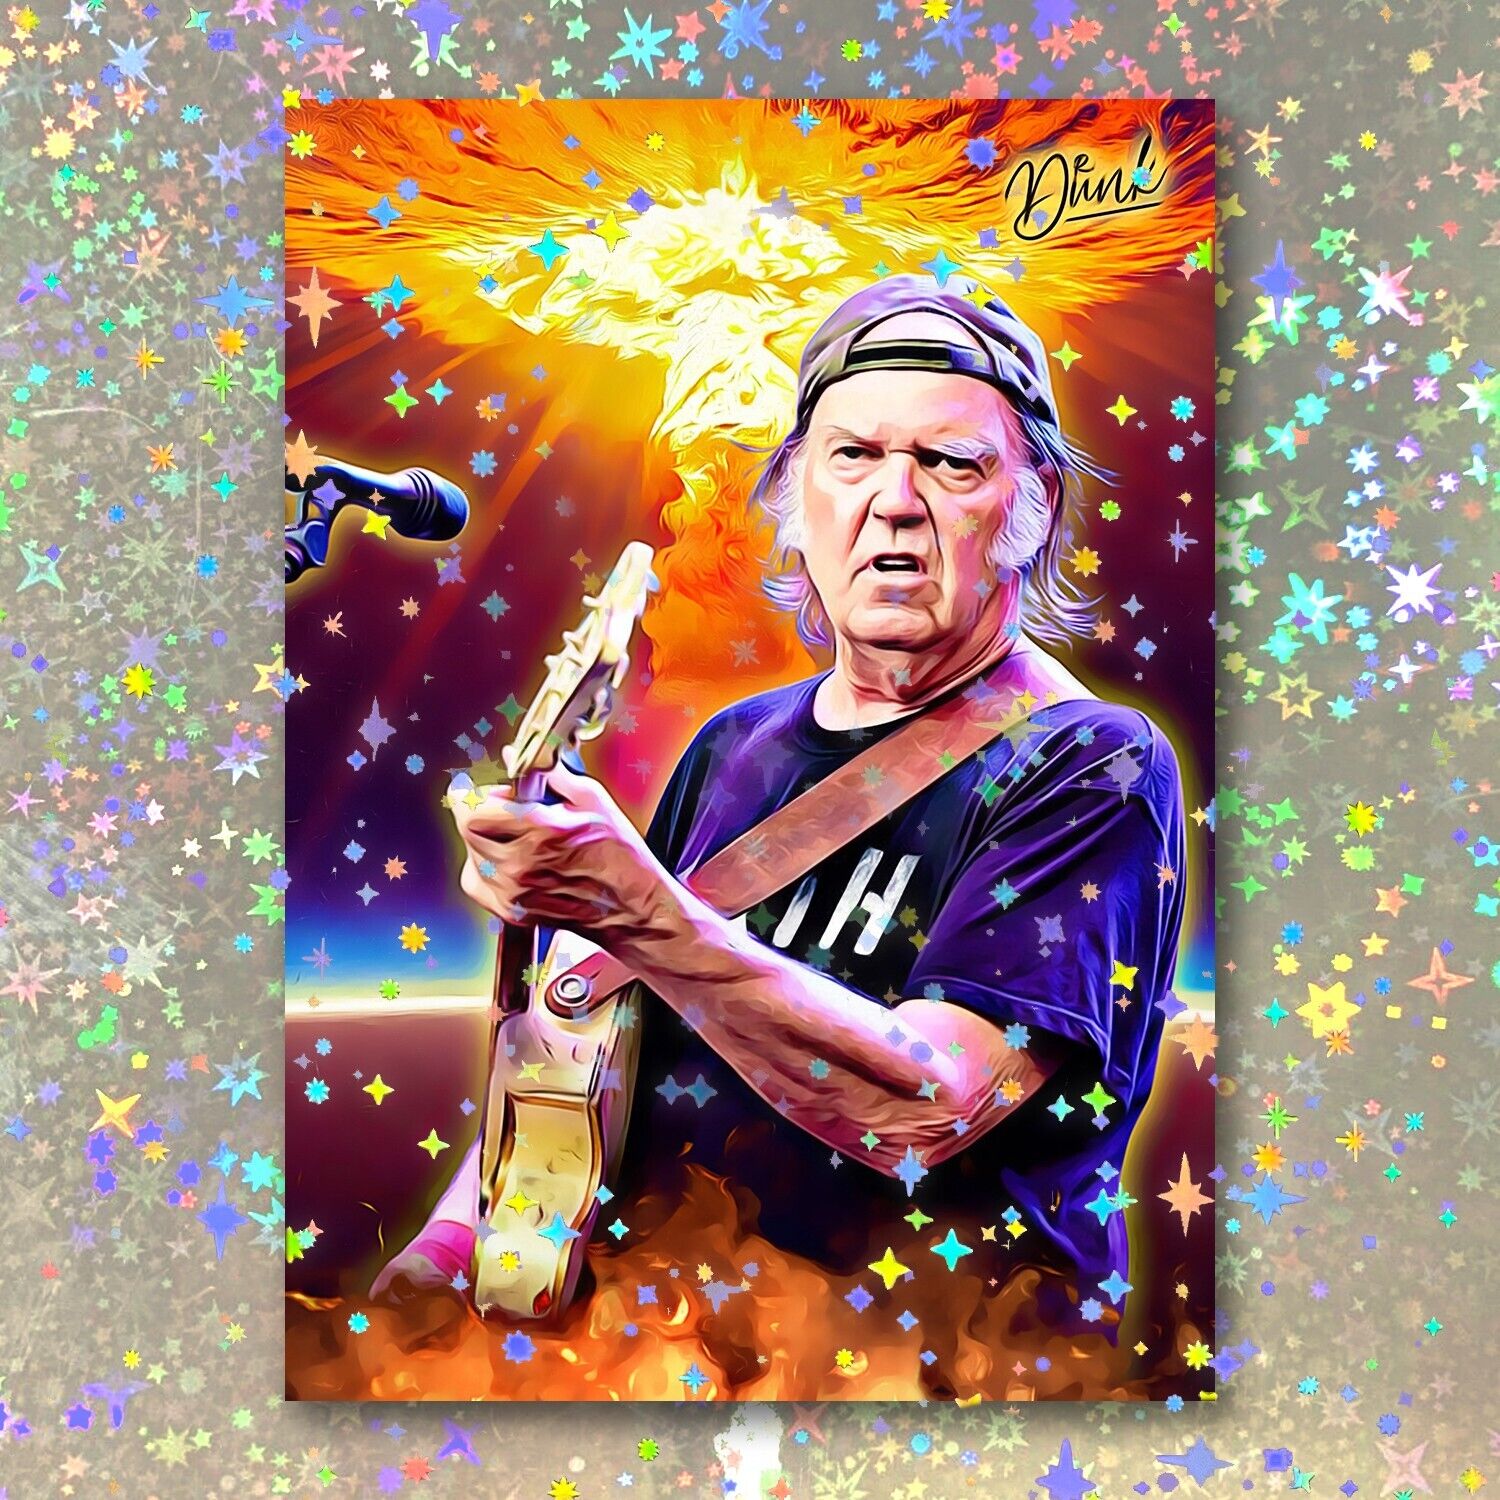 Neil Young Holographic Guitarmageddon Sketch Card Limited 1/5 Dr. Dunk Signed